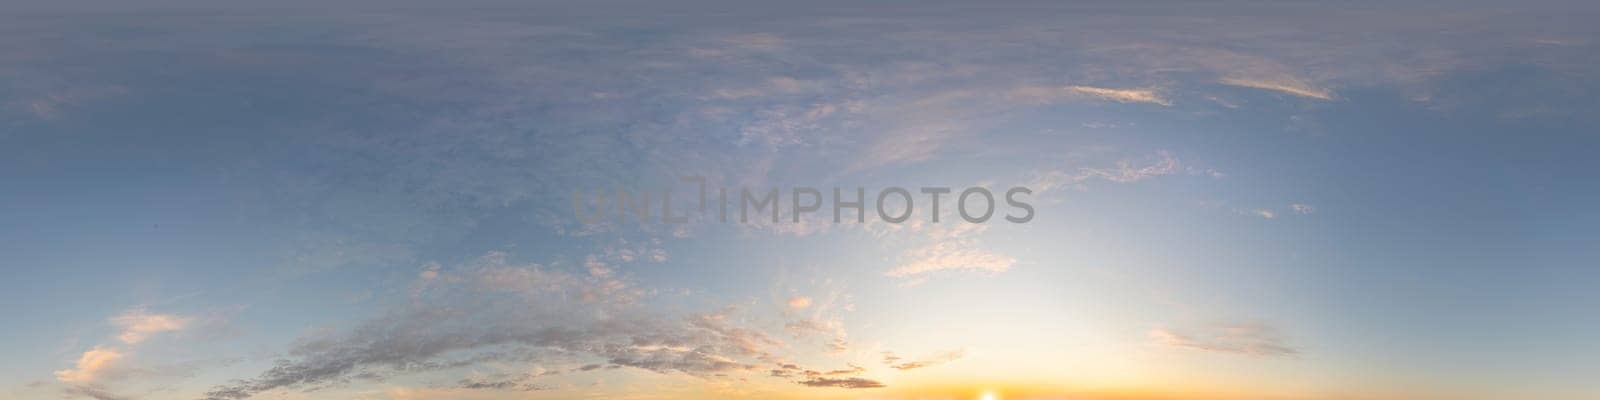 Dark blue sunset sky panorama with pink Cirrus clouds. Seamless hdr 360 panorama in spherical equirectangular format. Full zenith for 3D visualization, sky replacement for aerial drone panoramas. by panophotograph